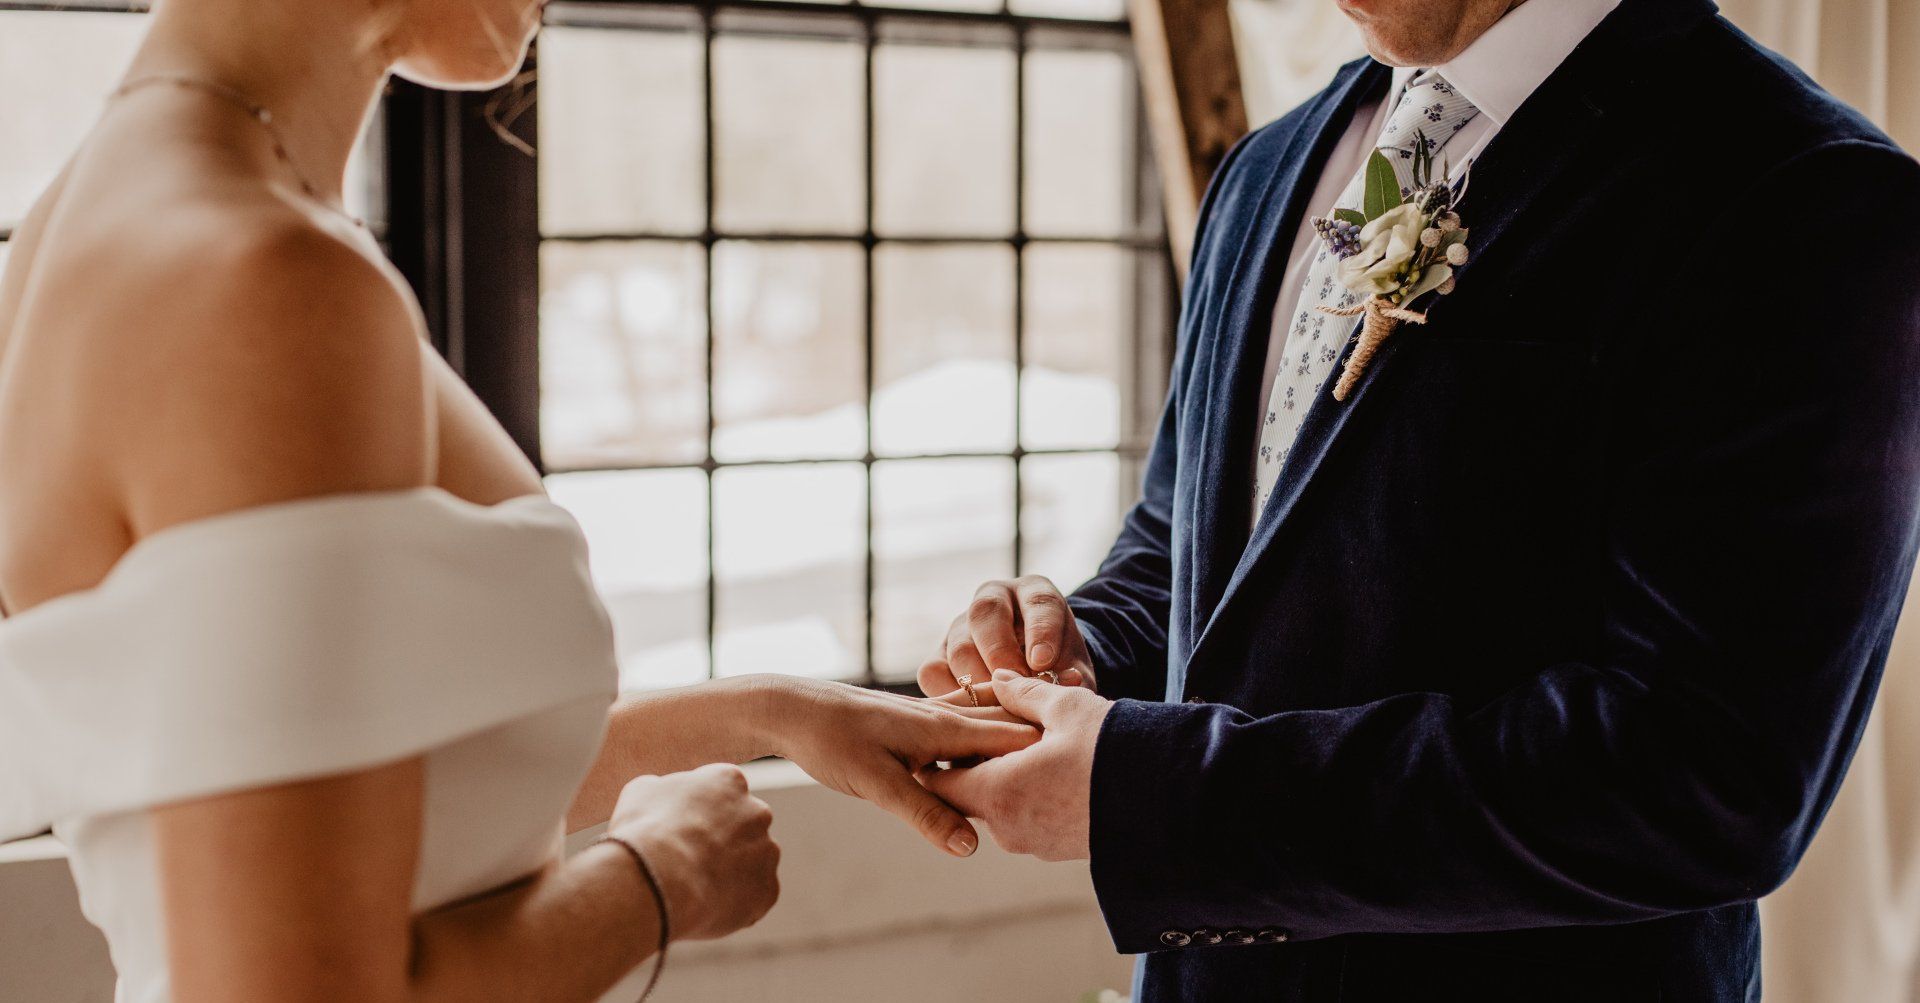 the groom gives wedding ring to bride at wedding ceremony